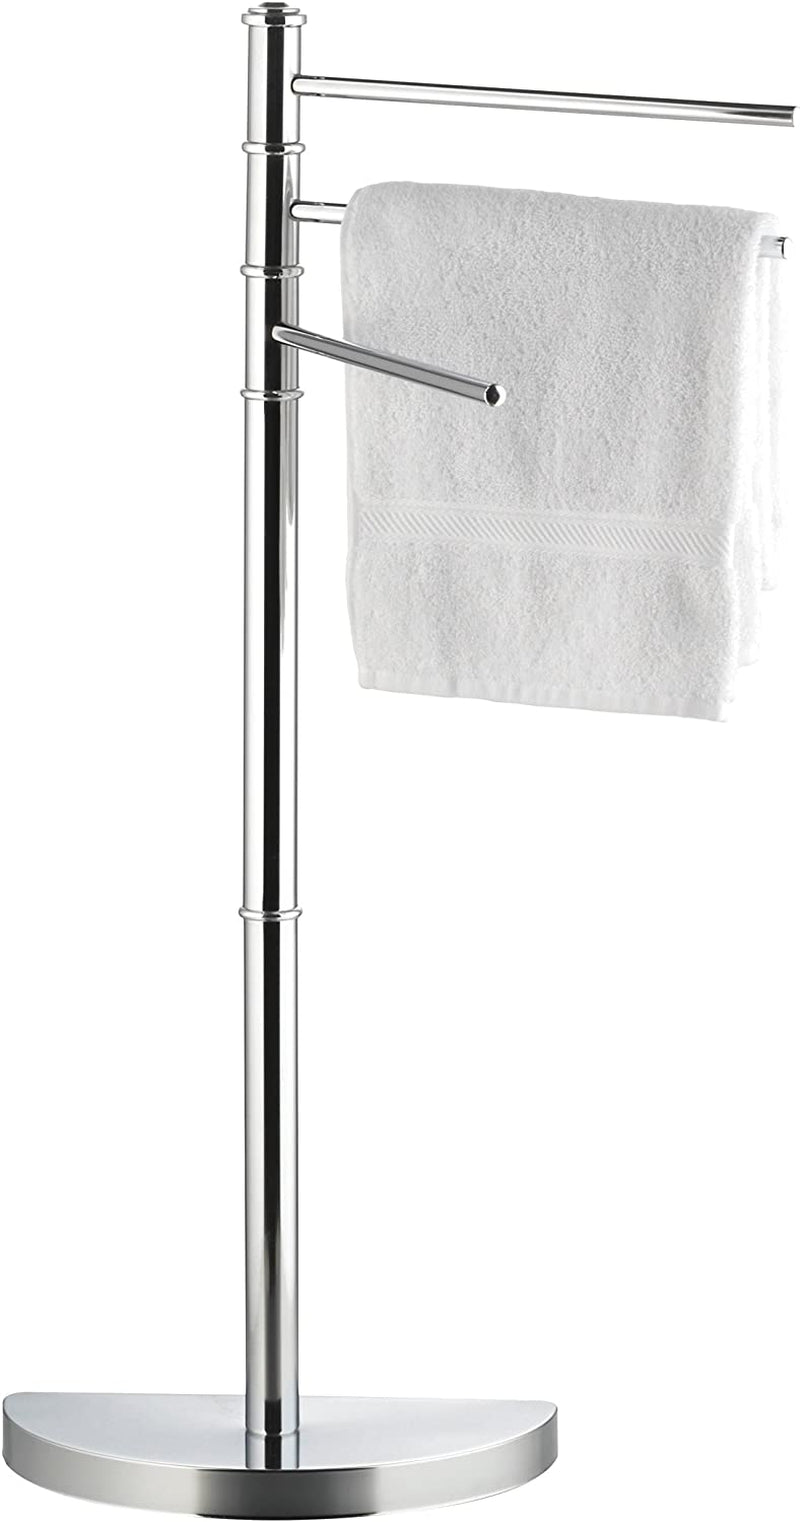 Axentia Lianos Free-Standing Swivel Towel Holder Rack, Chromed Metal Hand Bath Towel Stand, Bathroom Towel Hanger with 3 Adjustable Arms and Semicircular Base, Approx. 32,5 X 86 X 17,5 Cm High, Silver